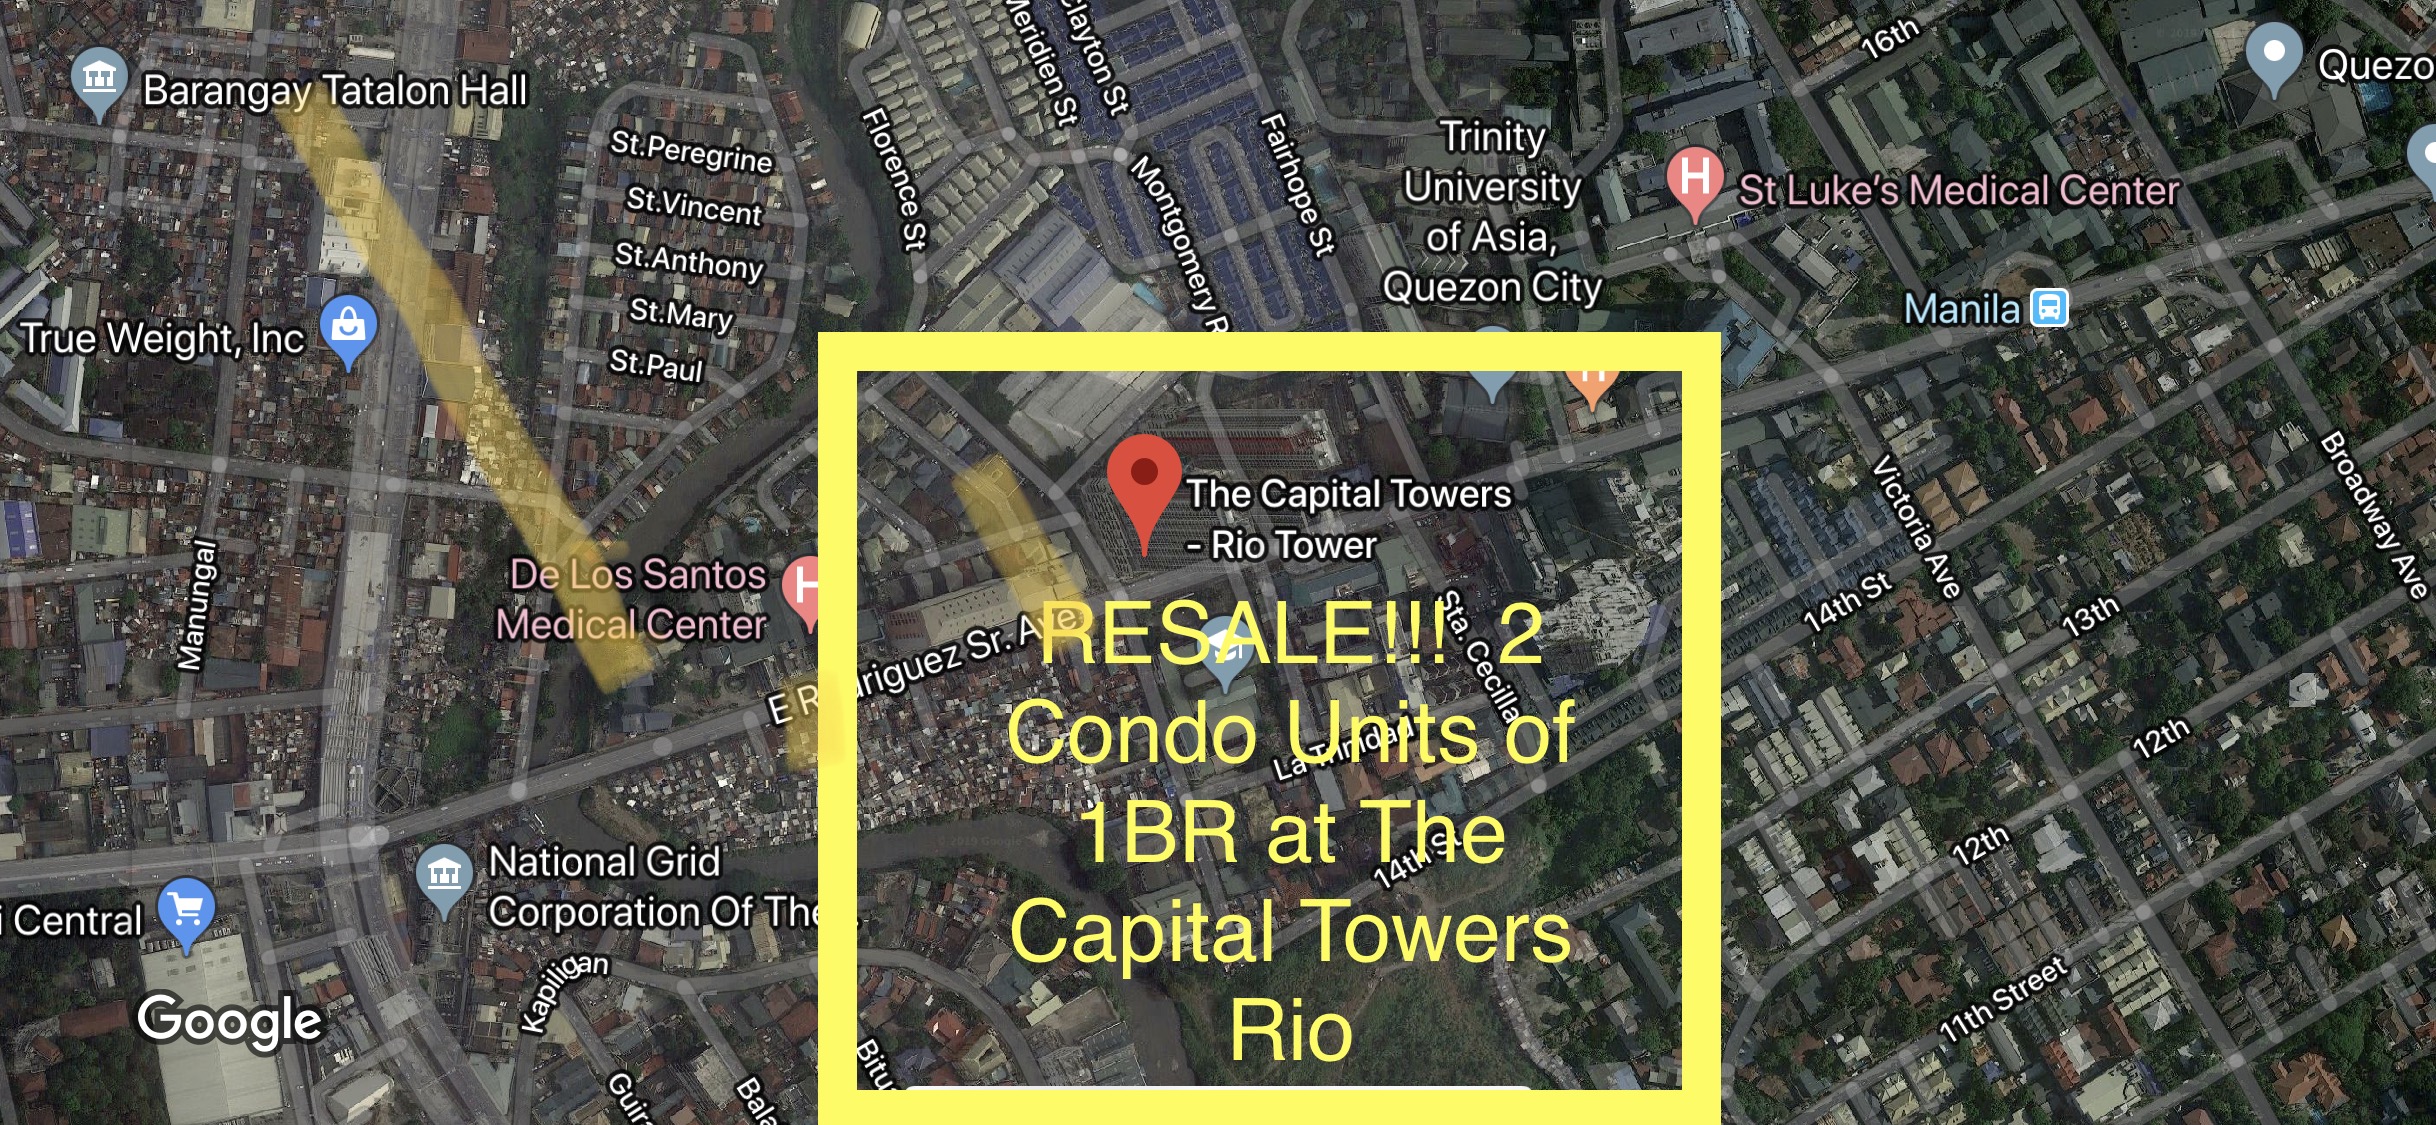 RESALE OF 2 CONDO UNITS 1BR AT THE CAPITAL TOWERS RIO NEAR ST. LUKES